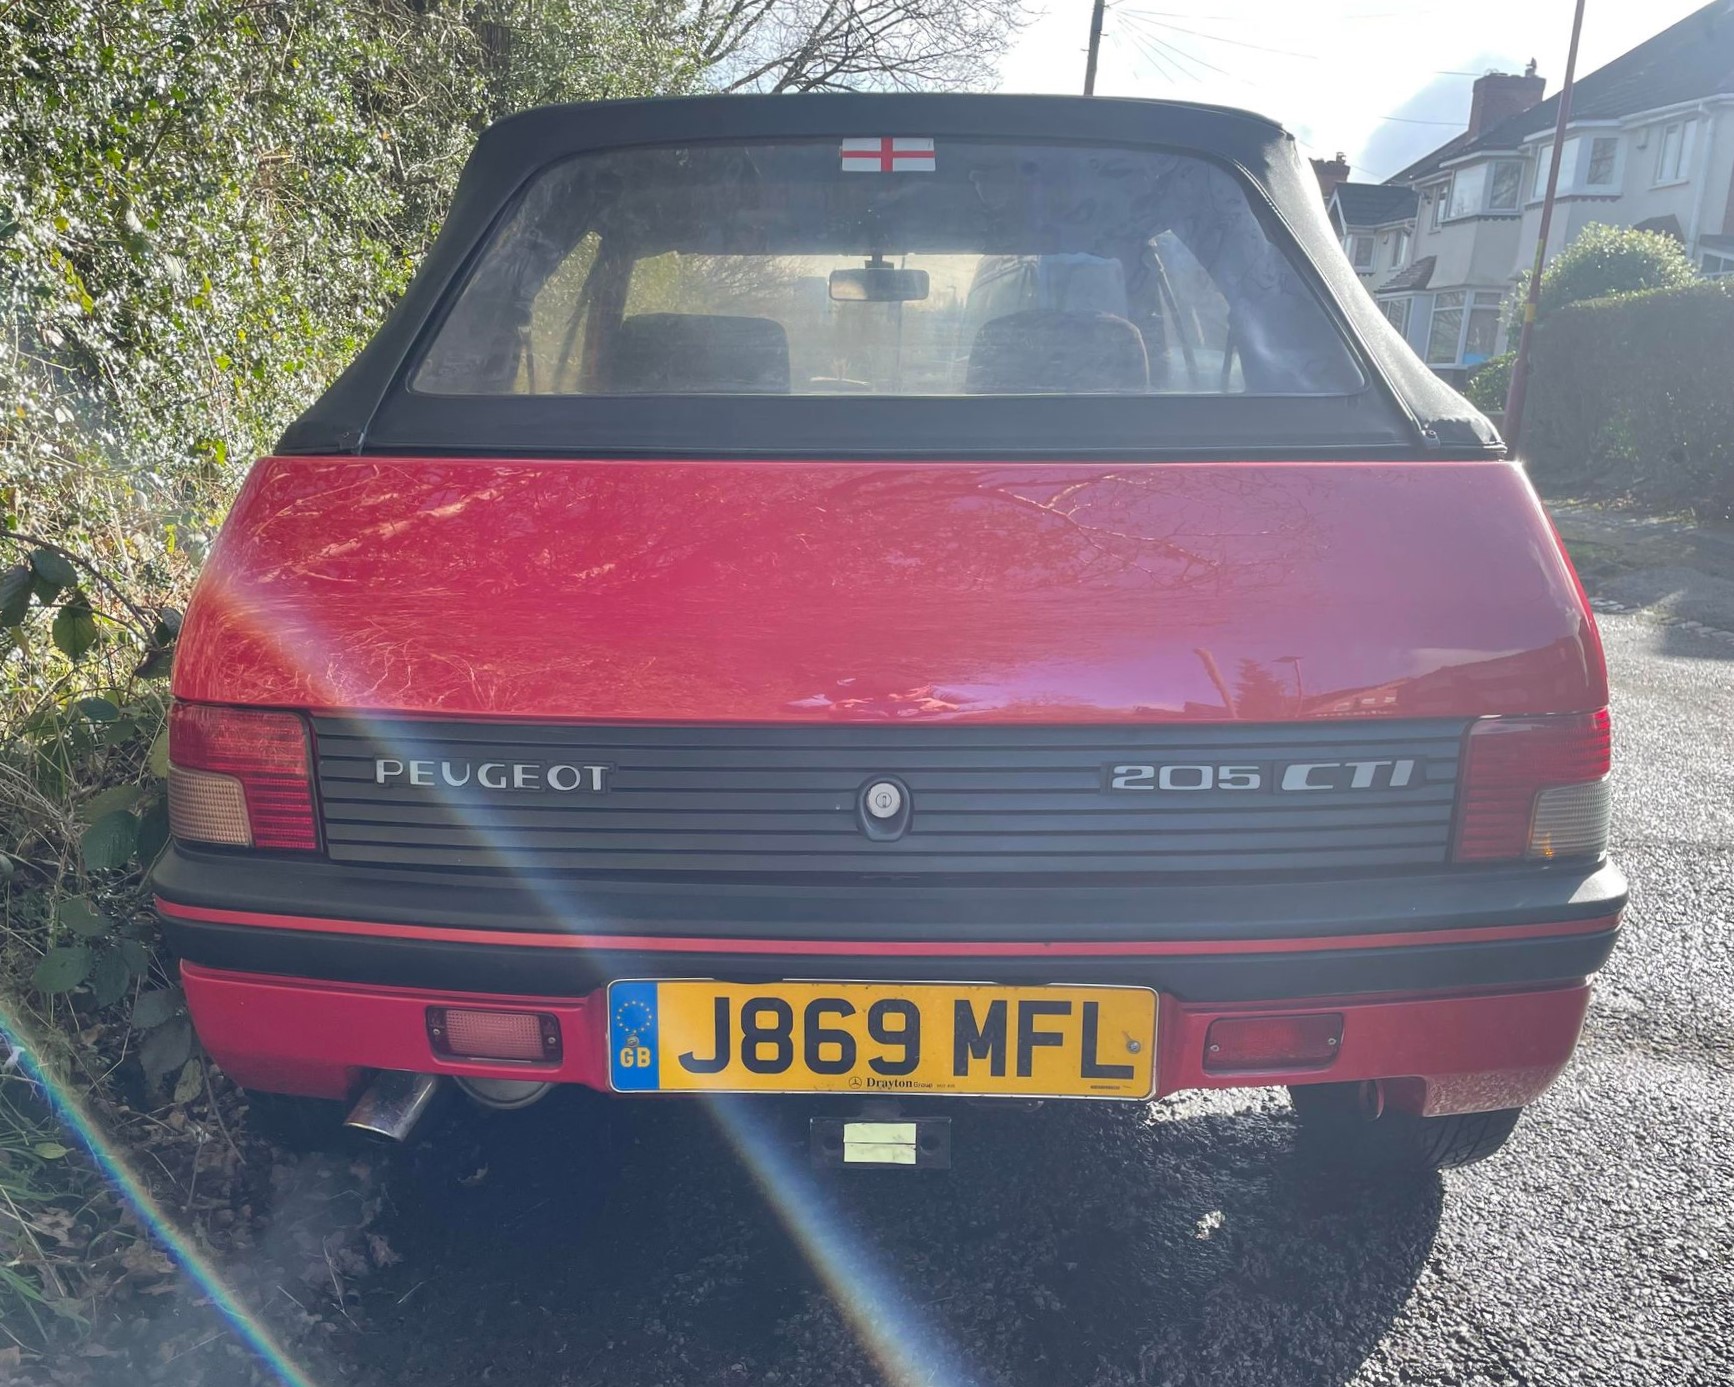 Peugeot 205 Cti 1.6 convertible - Mot'd 83,000 miles This stunning low mileage car has been - Image 7 of 18